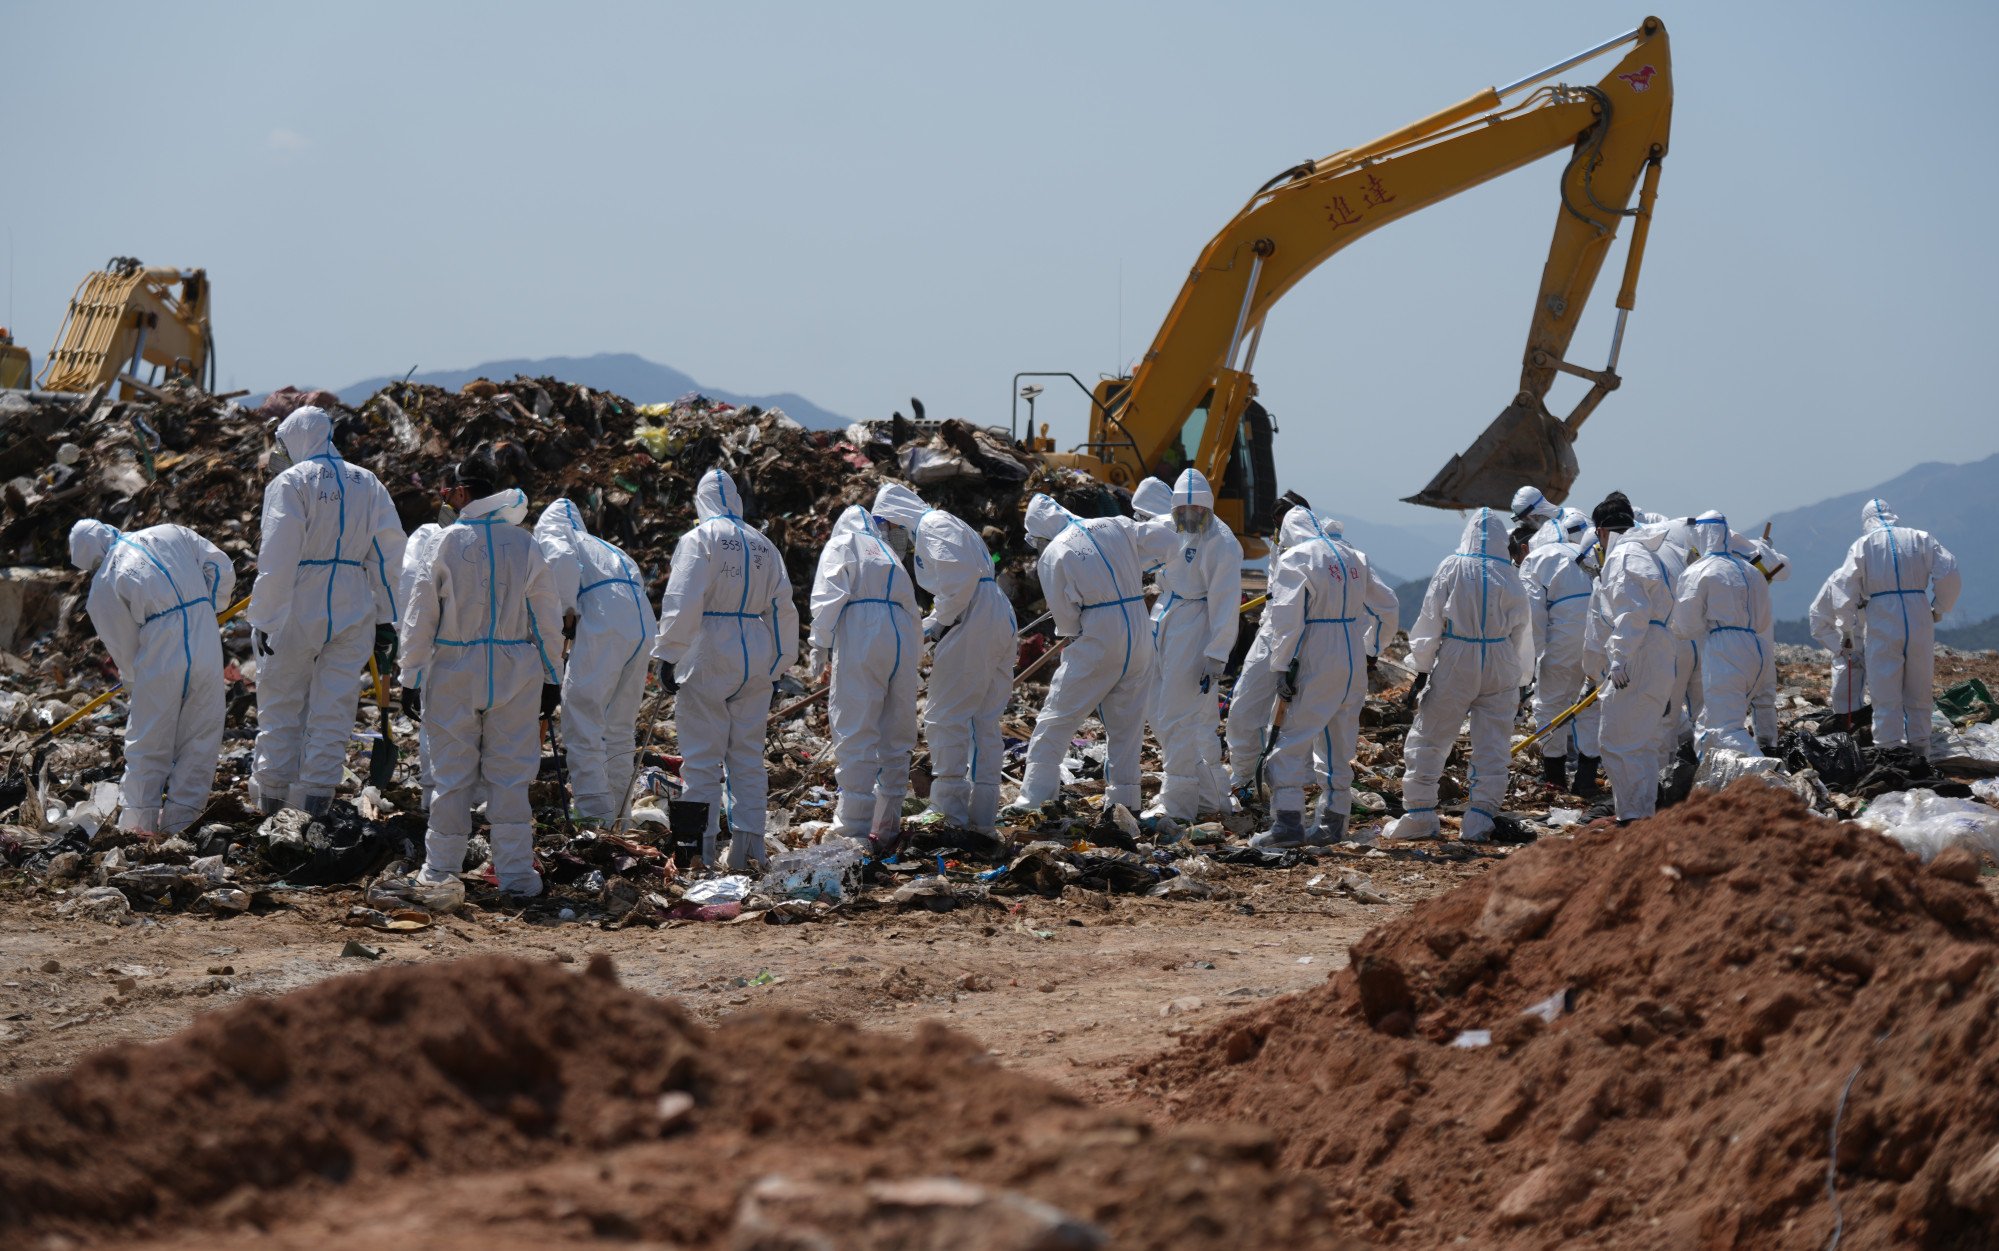 More than 100 police officers in February this year comb through rubbish in the North East New Territories Landfill to search for some of Choi’s missing remains. Photo: Sam Tsang